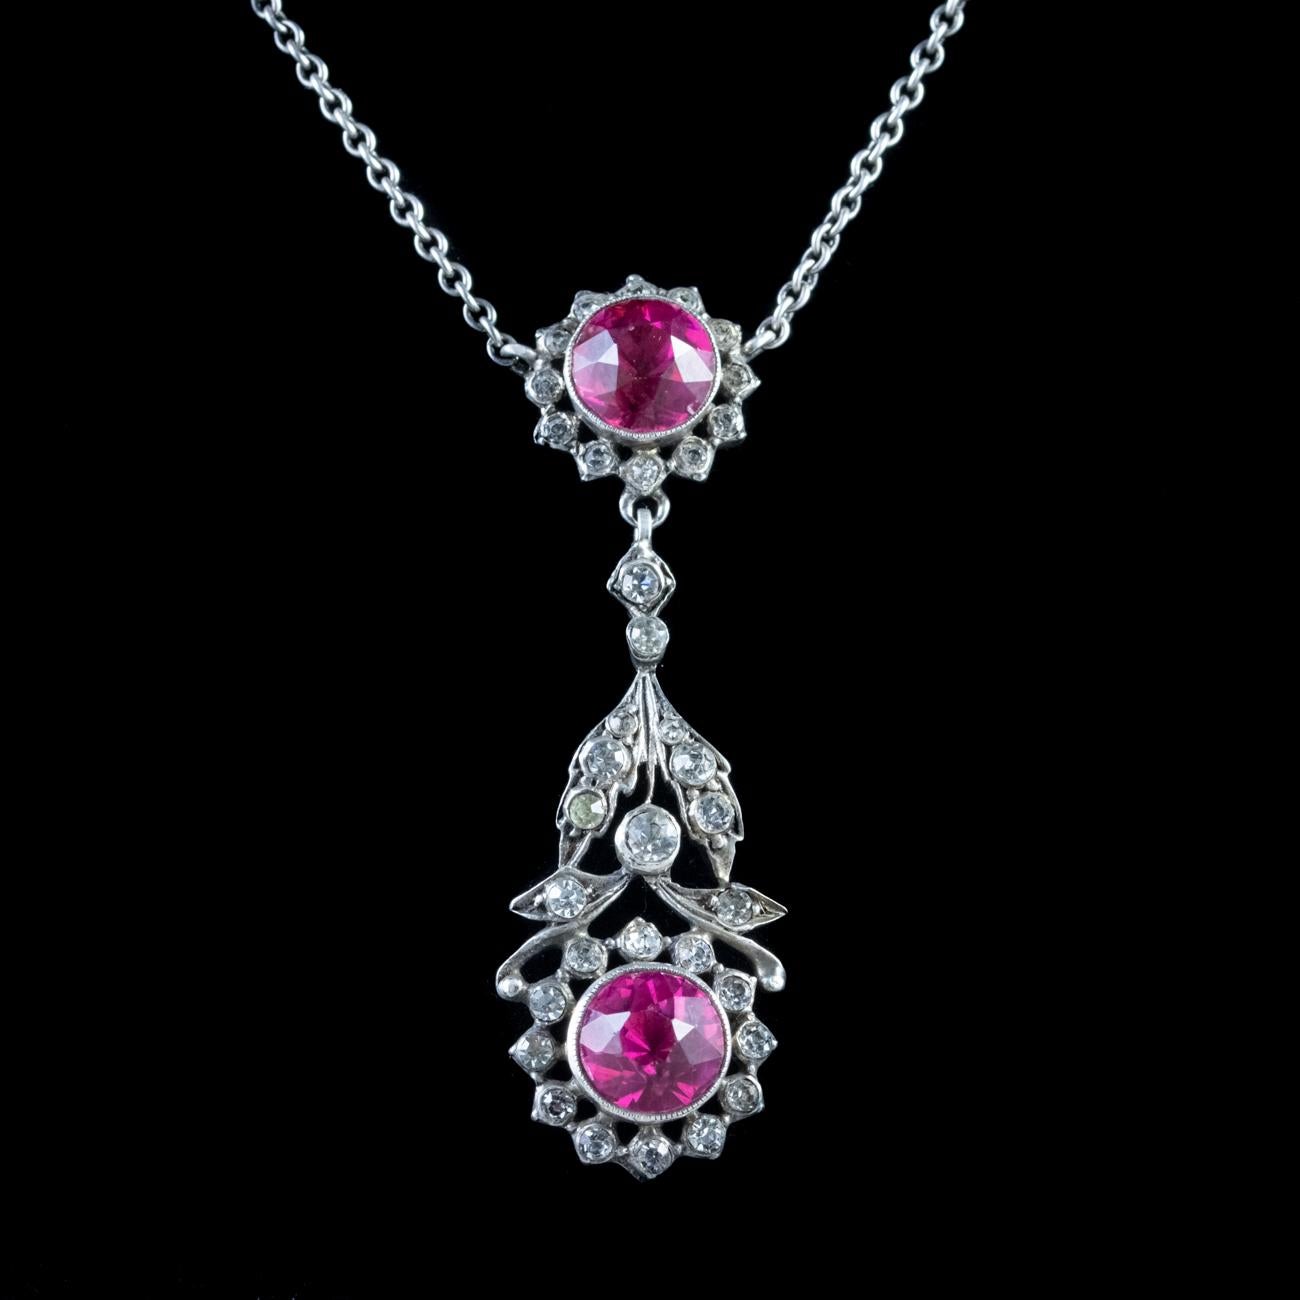 This beautiful Antique Edwardian pendant and necklace has been modelled in Silver, circa 1910. The pendant, which features a dropper, consists of a foliate style design set with two gorgeous pink Paste stones weighing approx. 1.75ct each. These are